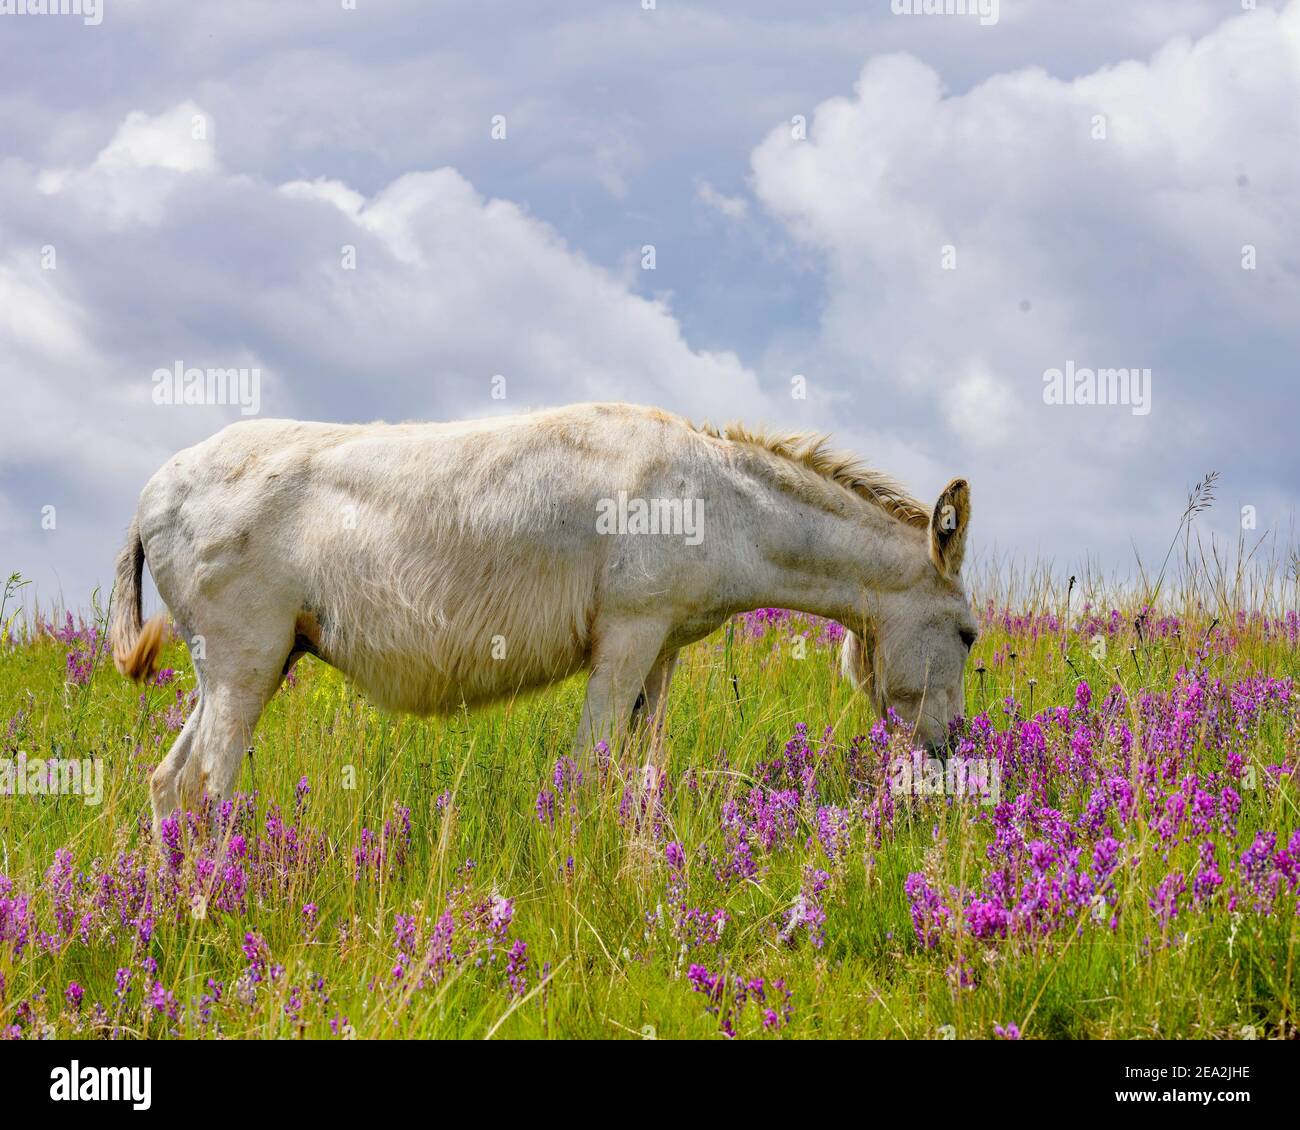 White Wild Burro grazing the tall green grass surrounded by pink wild flowers Stock Photo